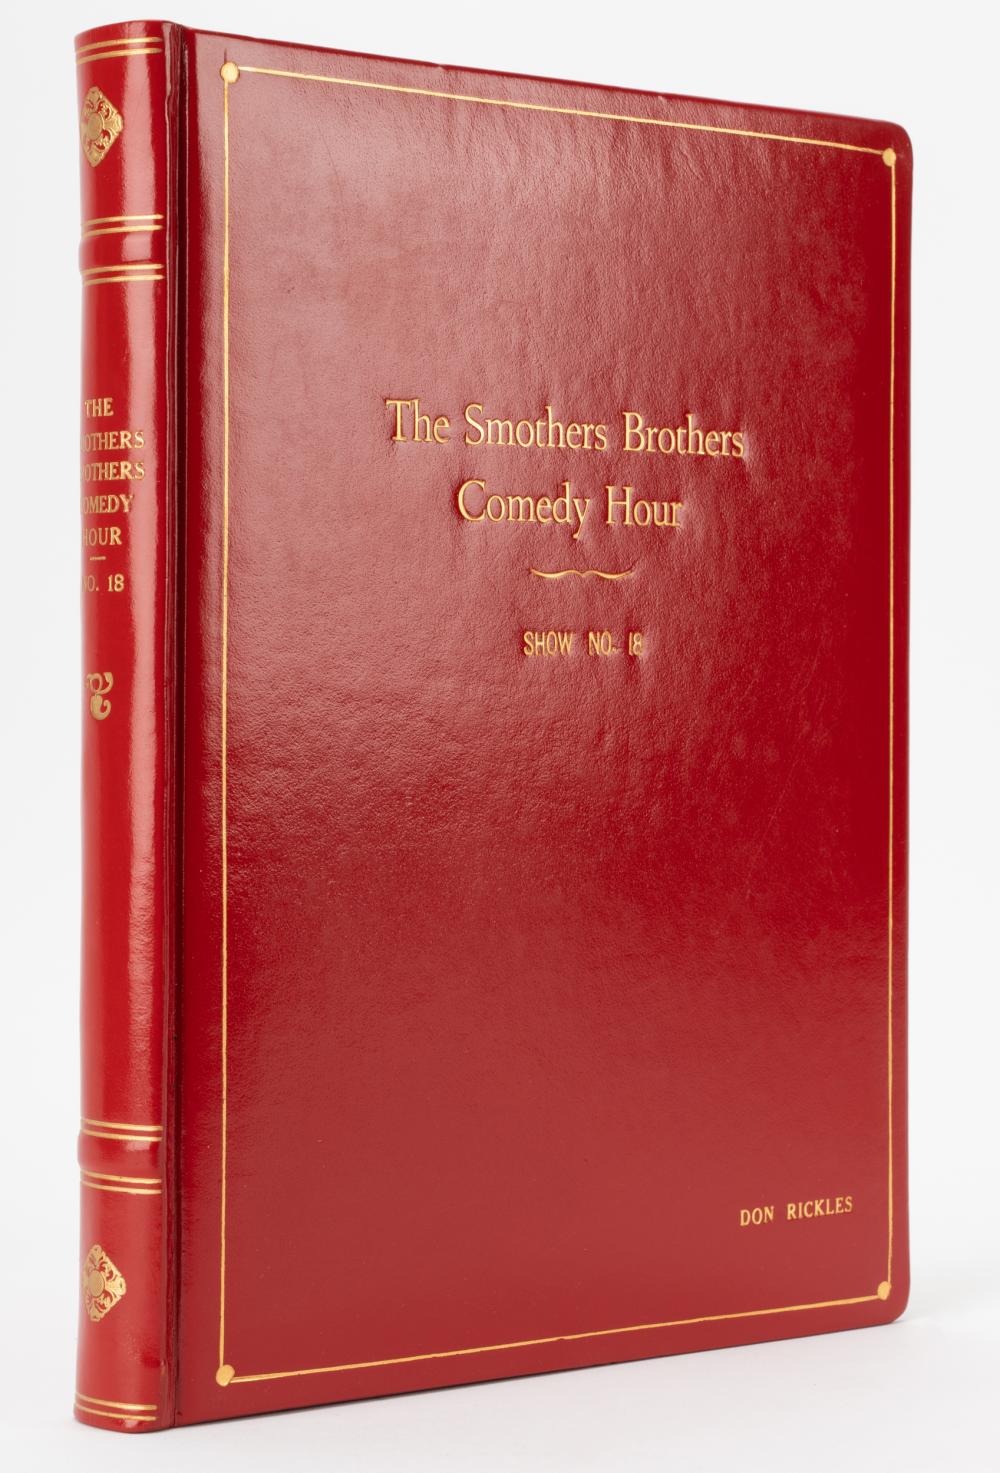 DON RICKLES THE SMOTHERS BROTHERS 33023a